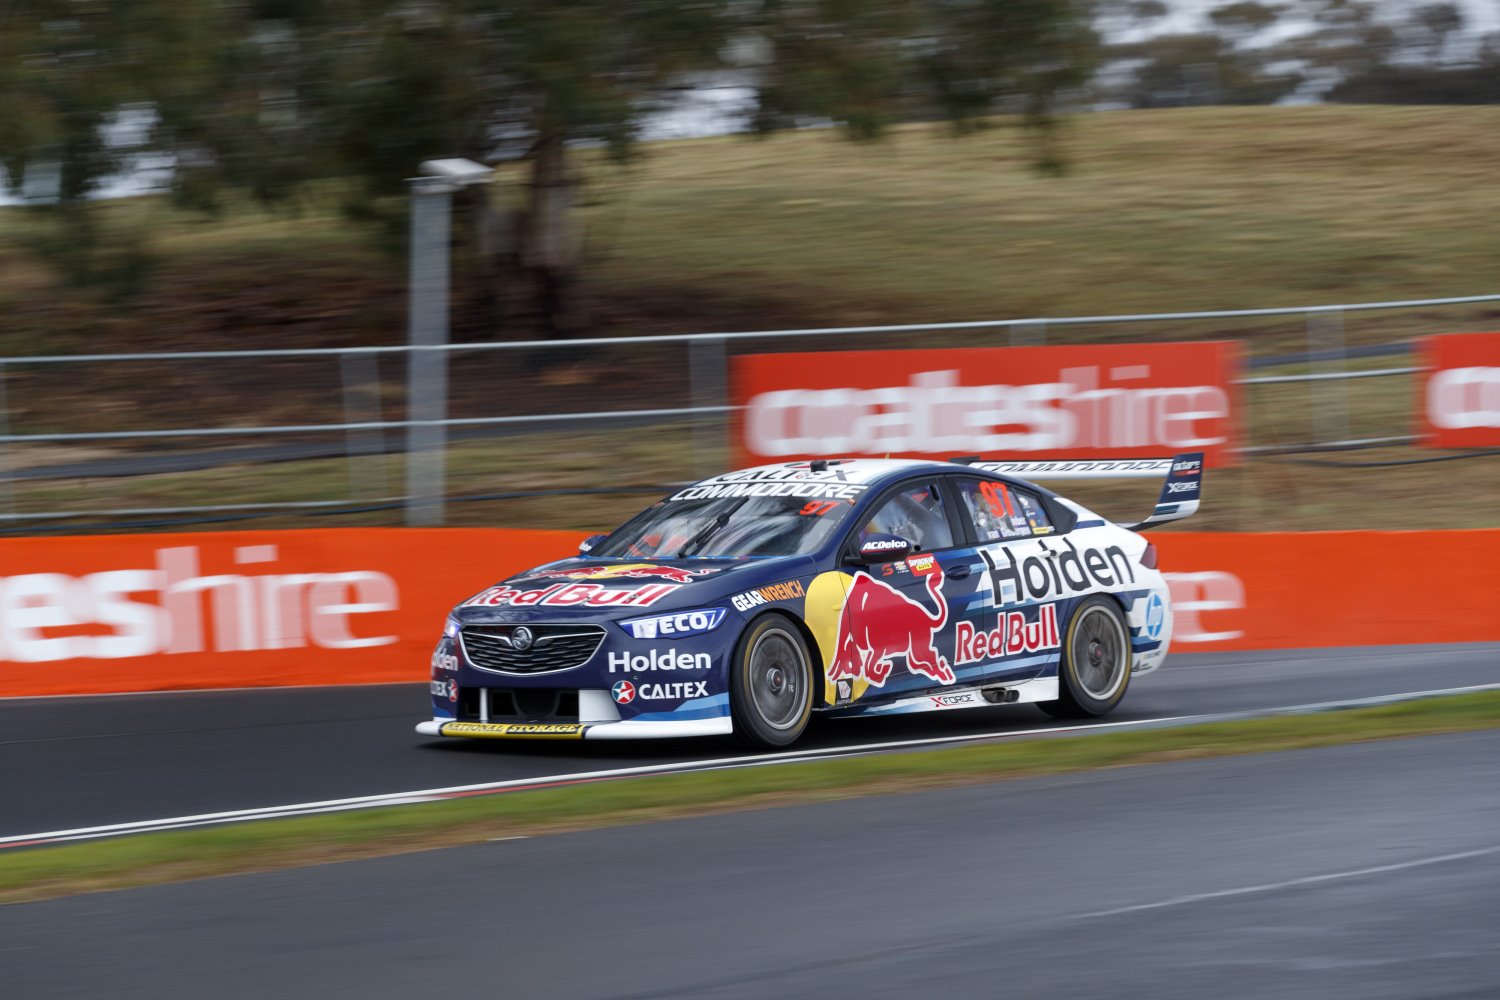 Shane van Gisbergen was the quickest of the Holden drivers